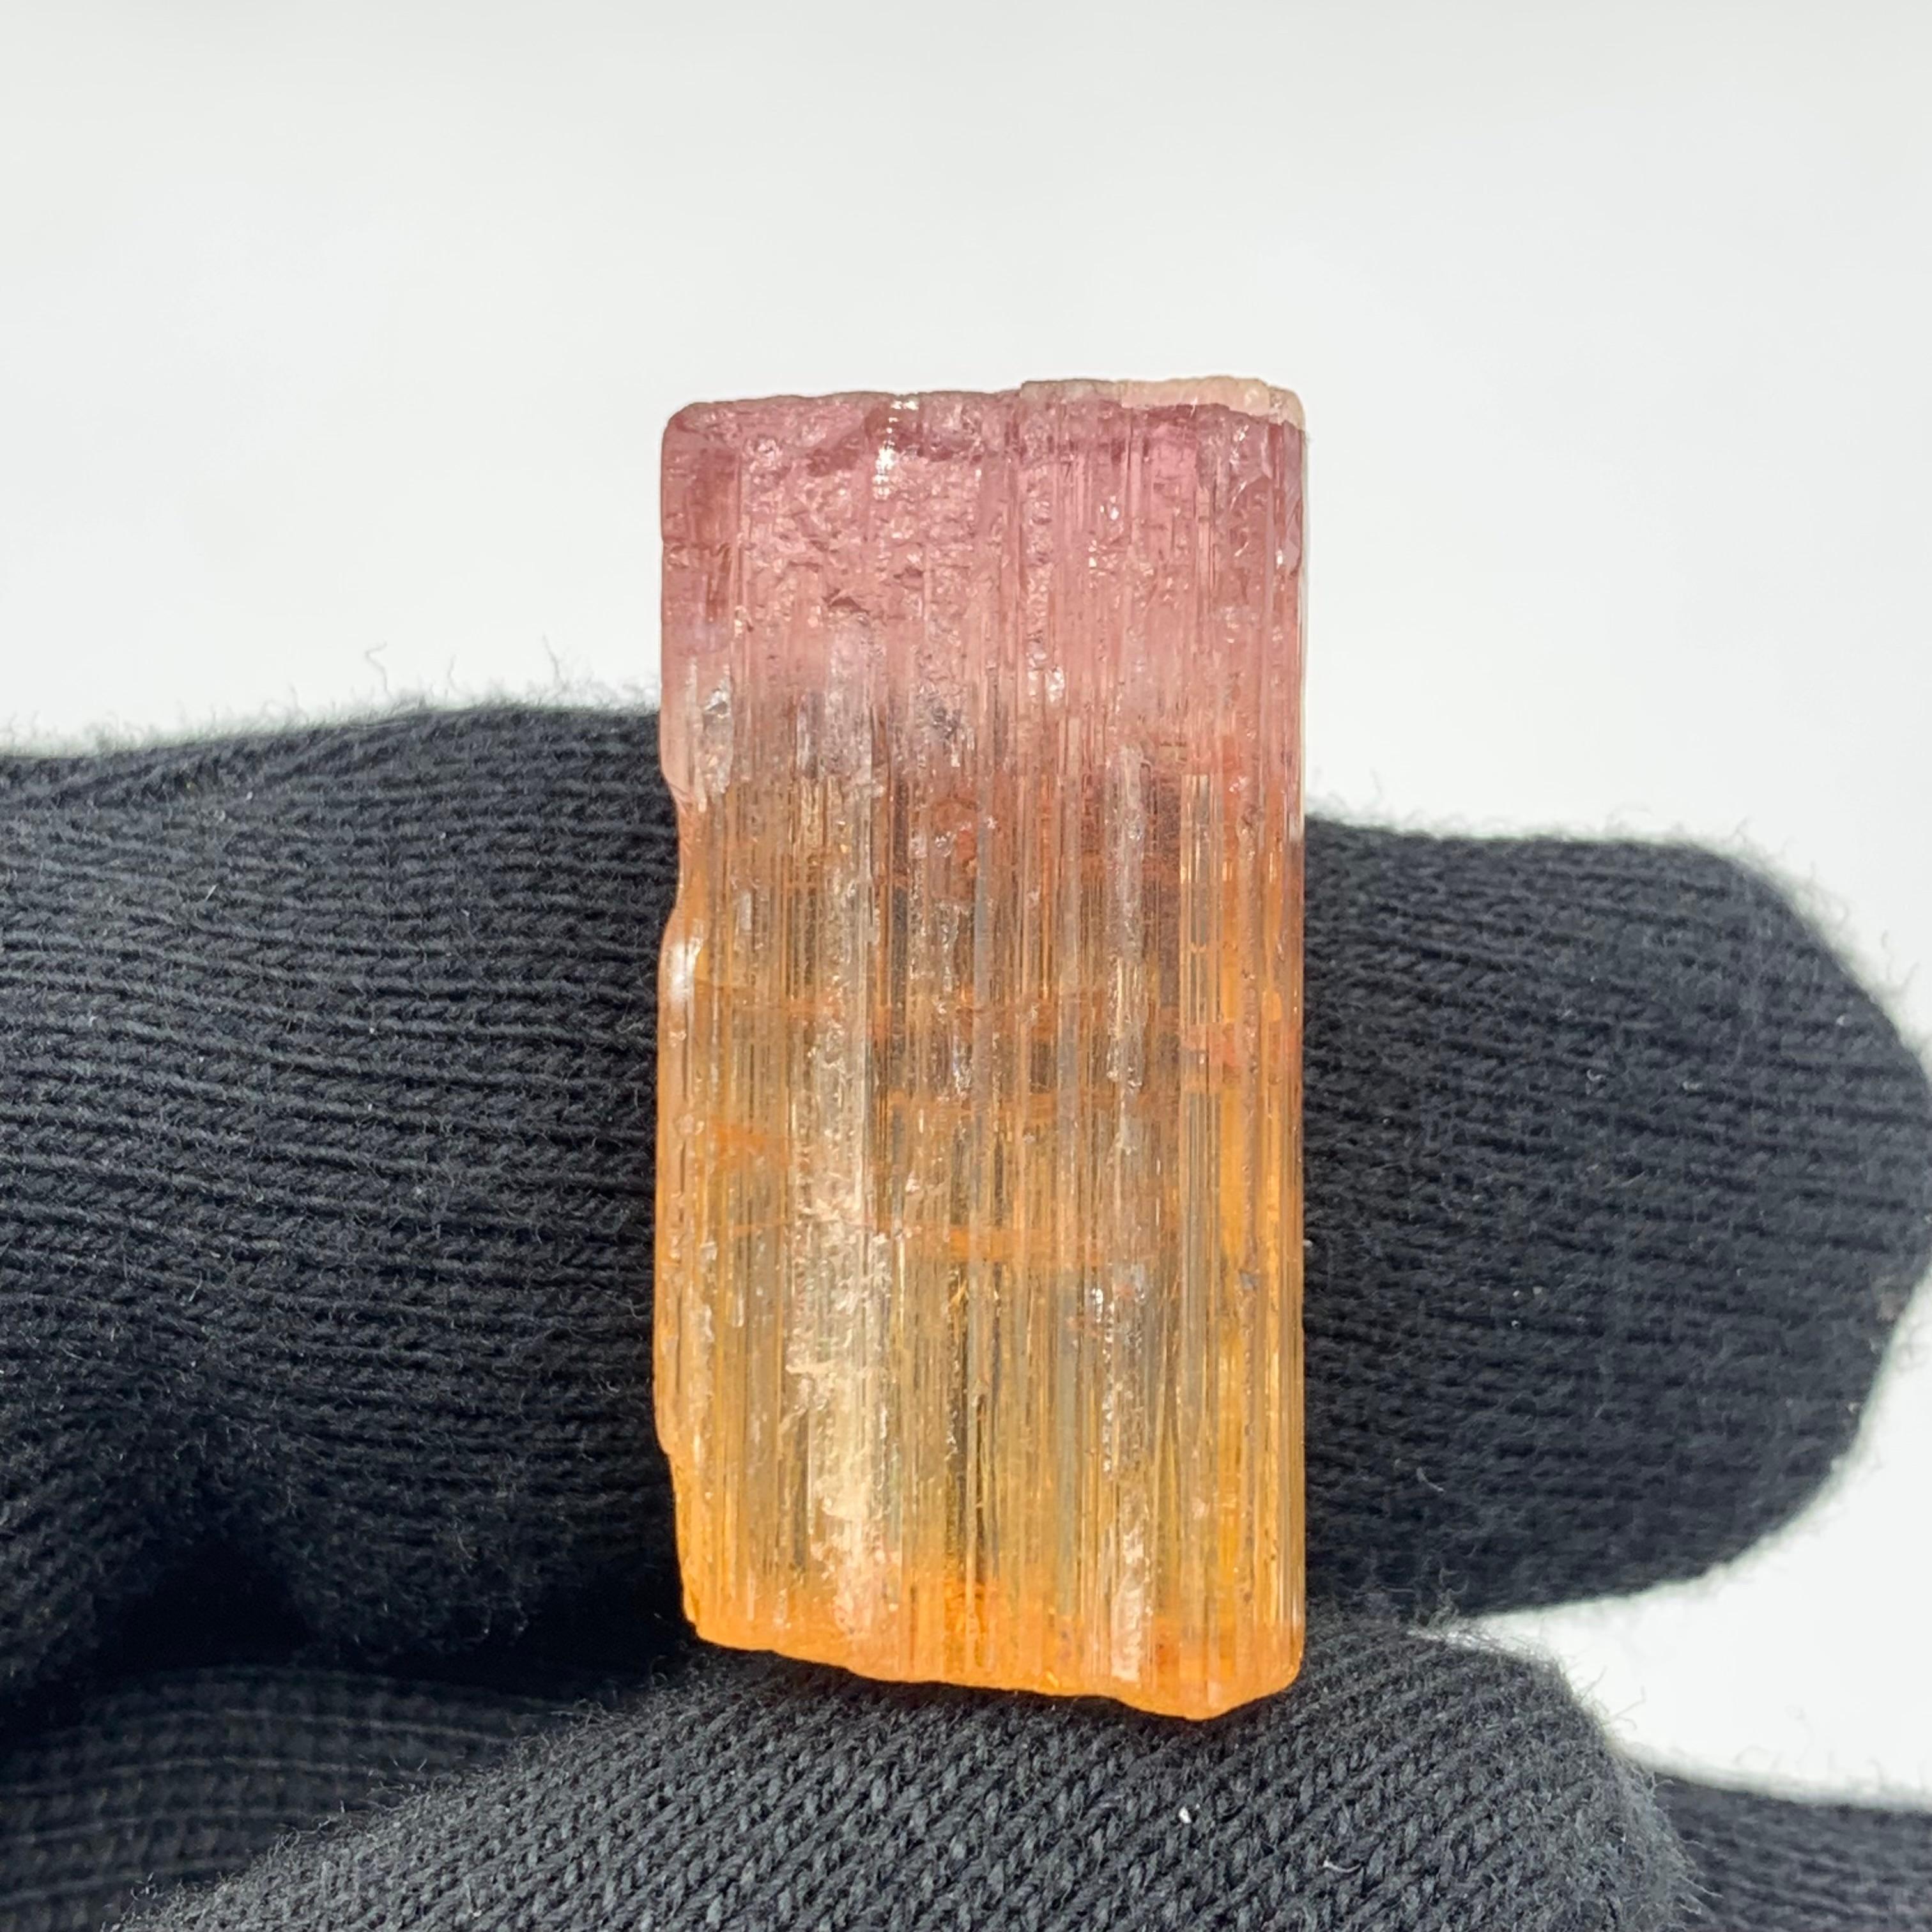 48 Carat Amazing Bi Color Tourmaline Crystal From Paprook Mine, Afghanistan For Sale 7